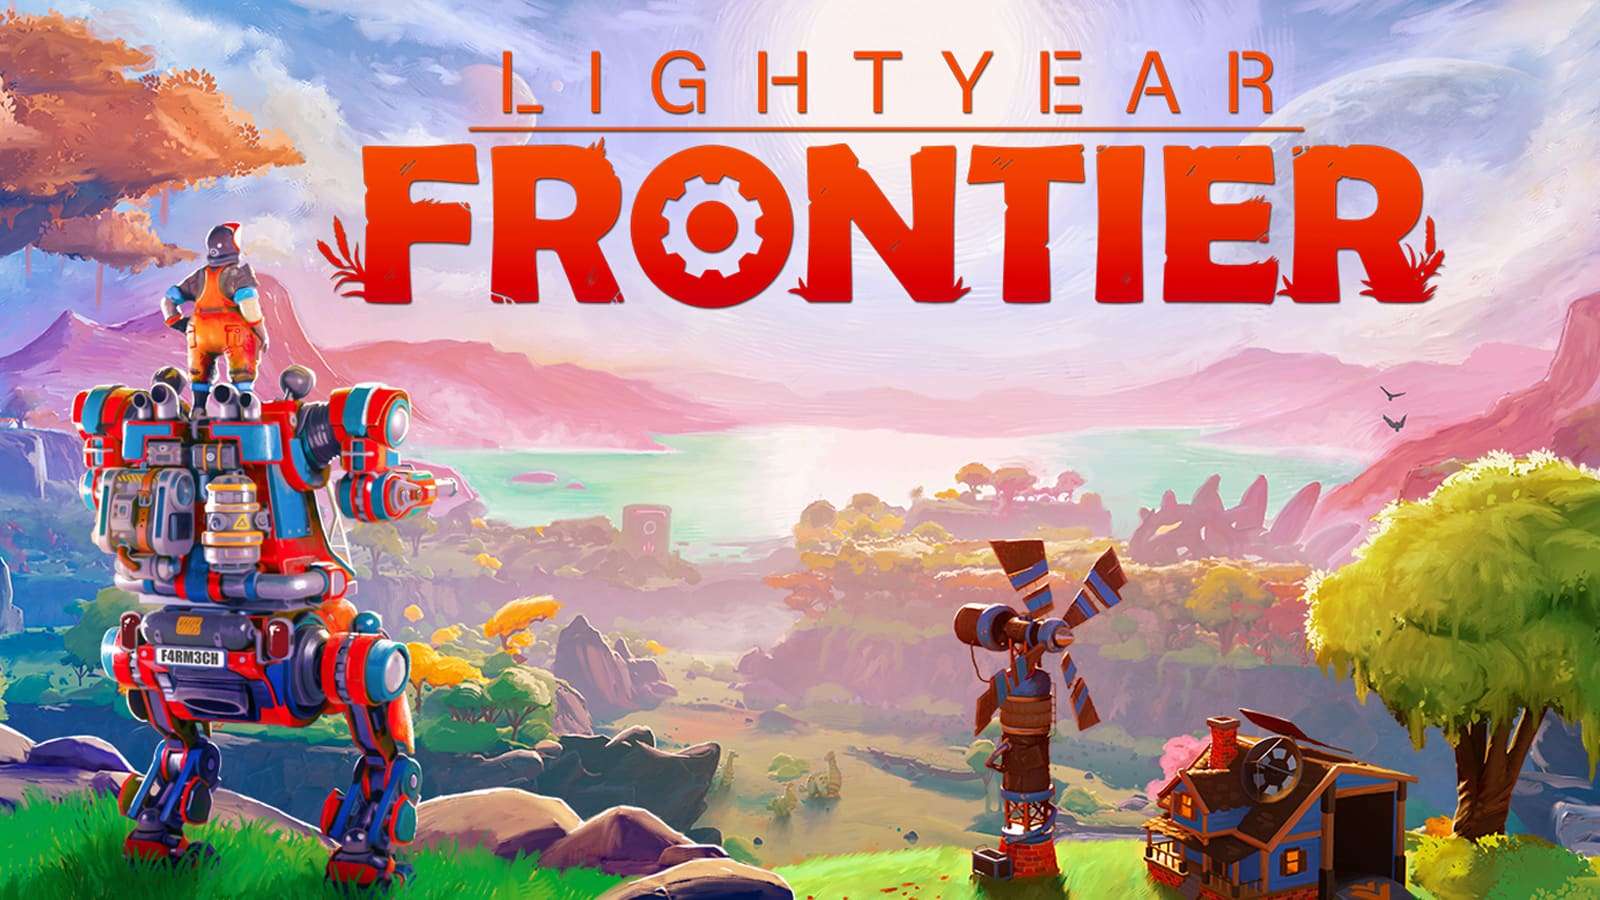 An image of the game Lightyear Frontier on Steam